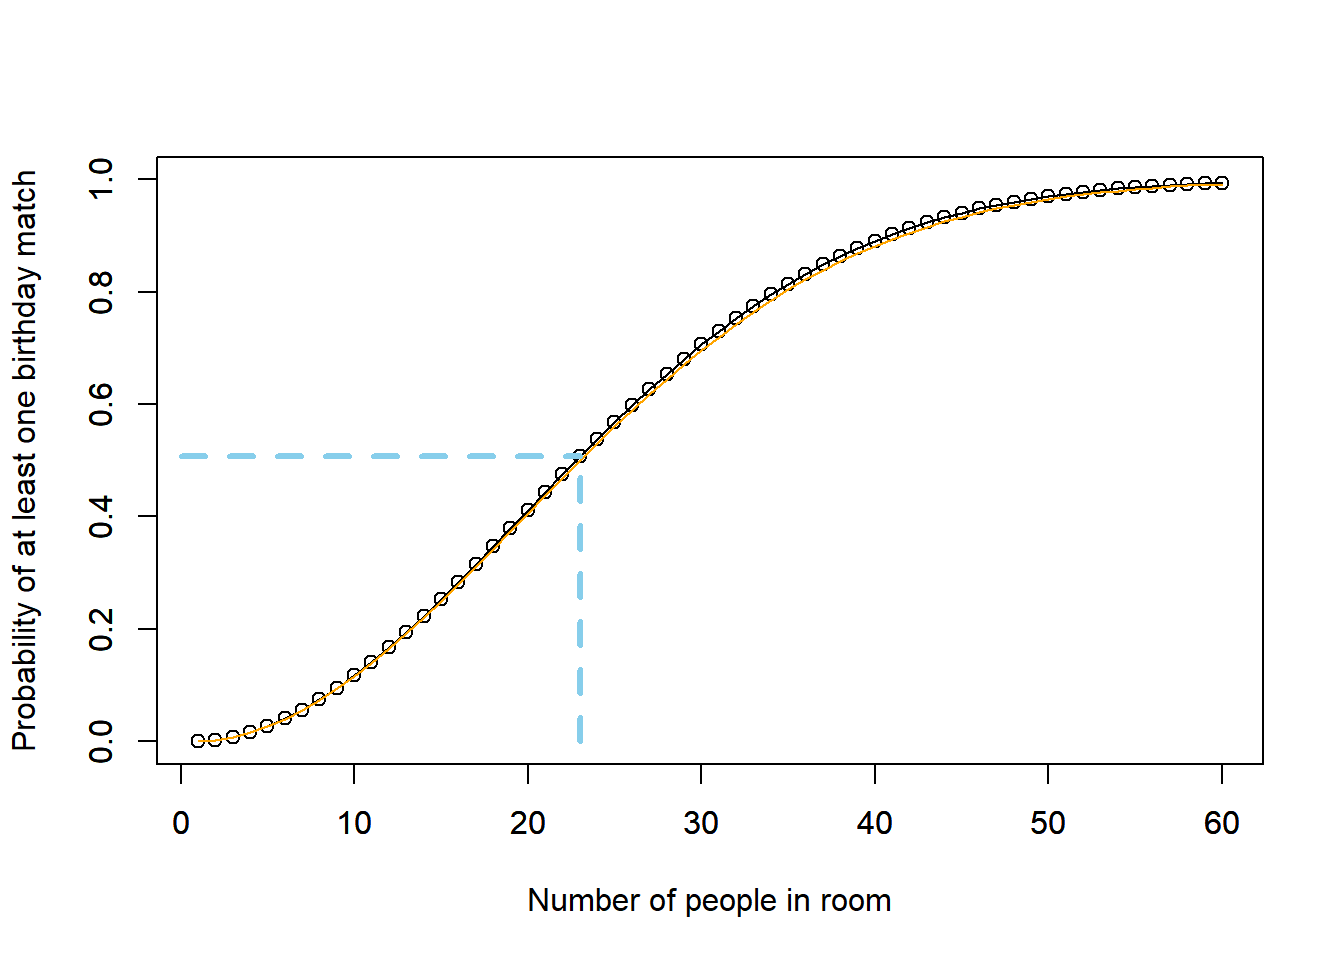 Probability of at least one birthday match as a function of the number of people in the room, along with the Poisson approximation. For 23 people, the probability of at least one birthday match is 0.507.